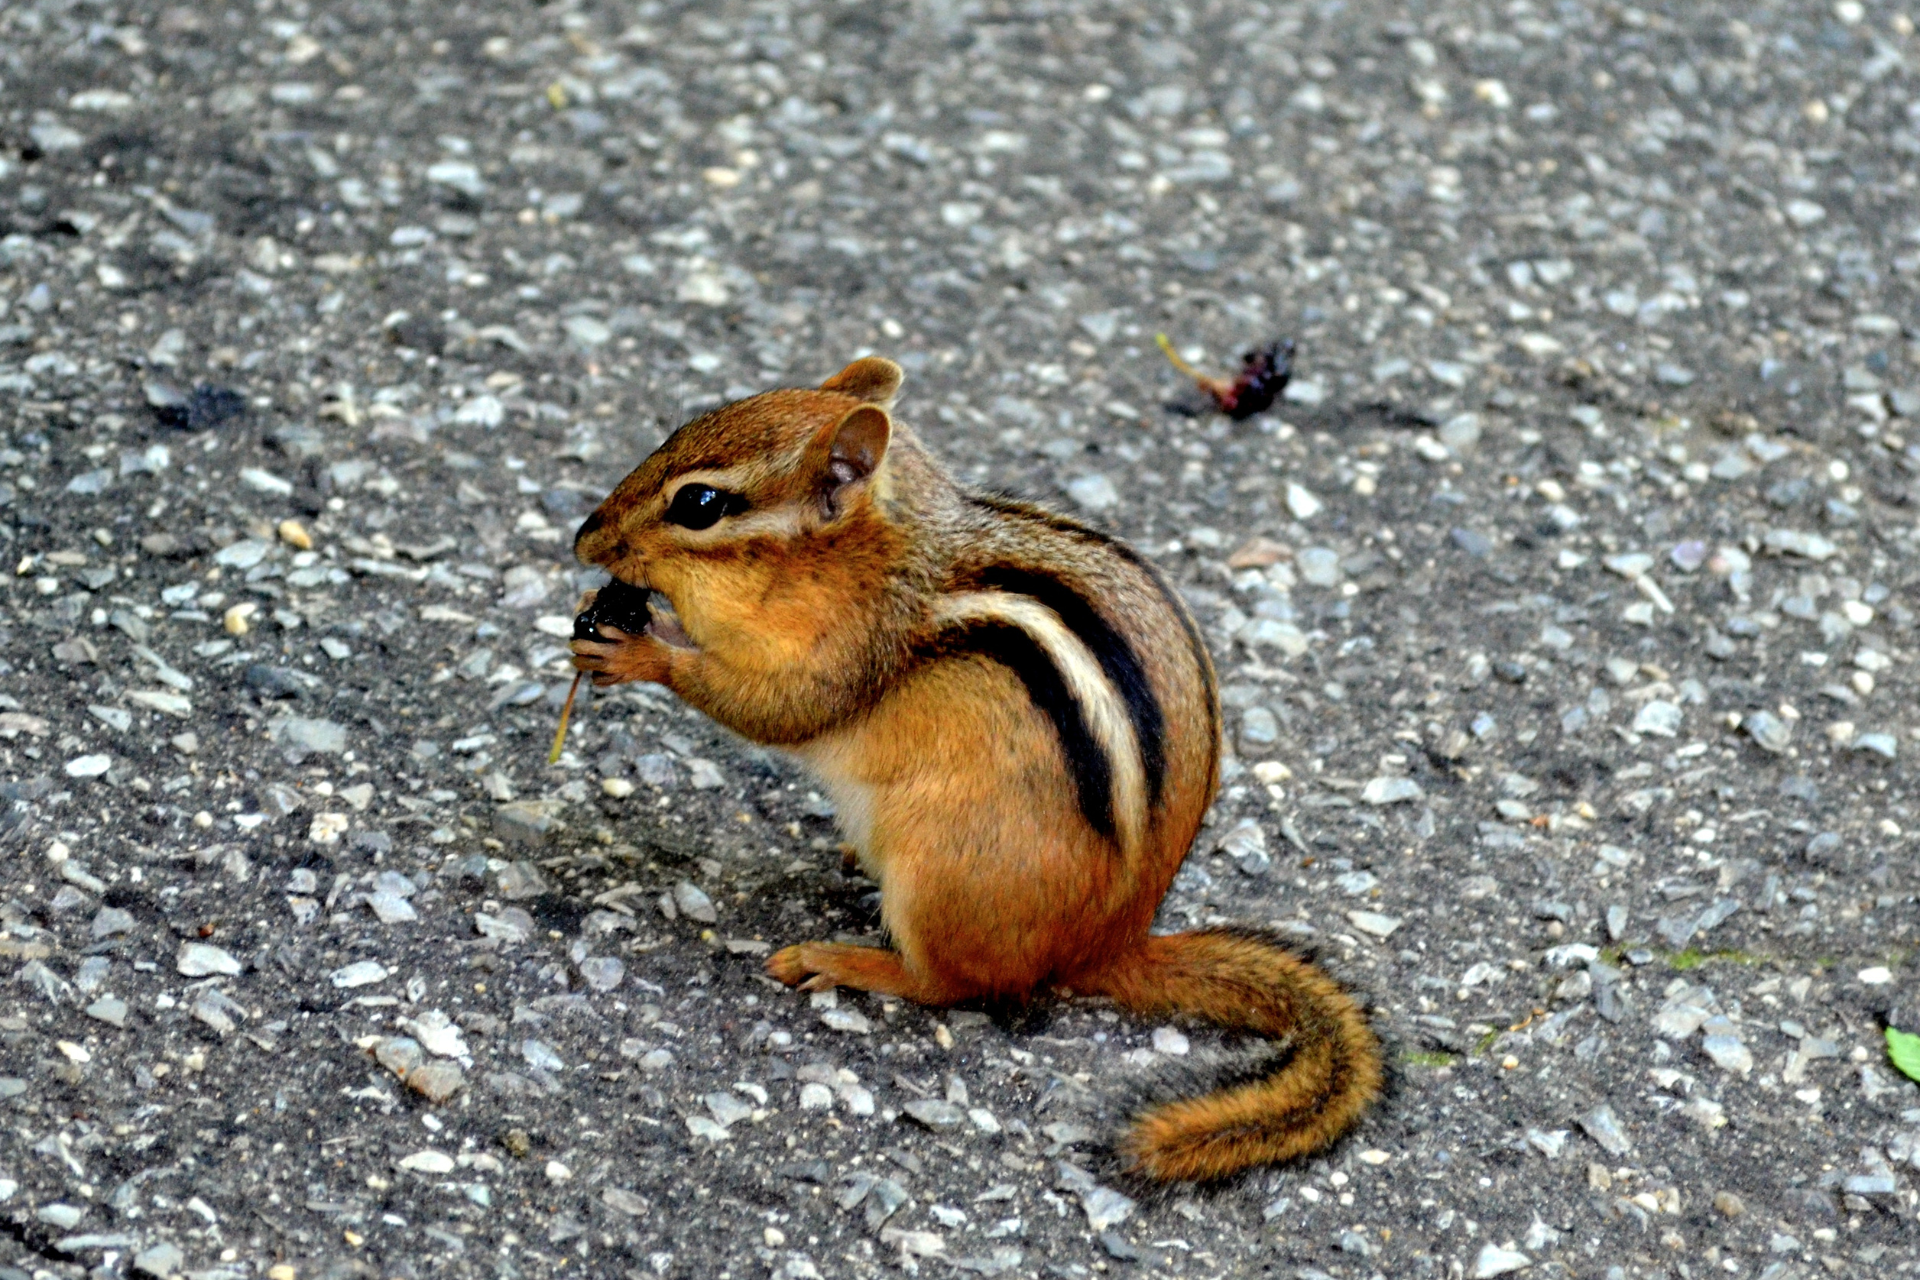 A chipmunk is eating a nut on the ground.